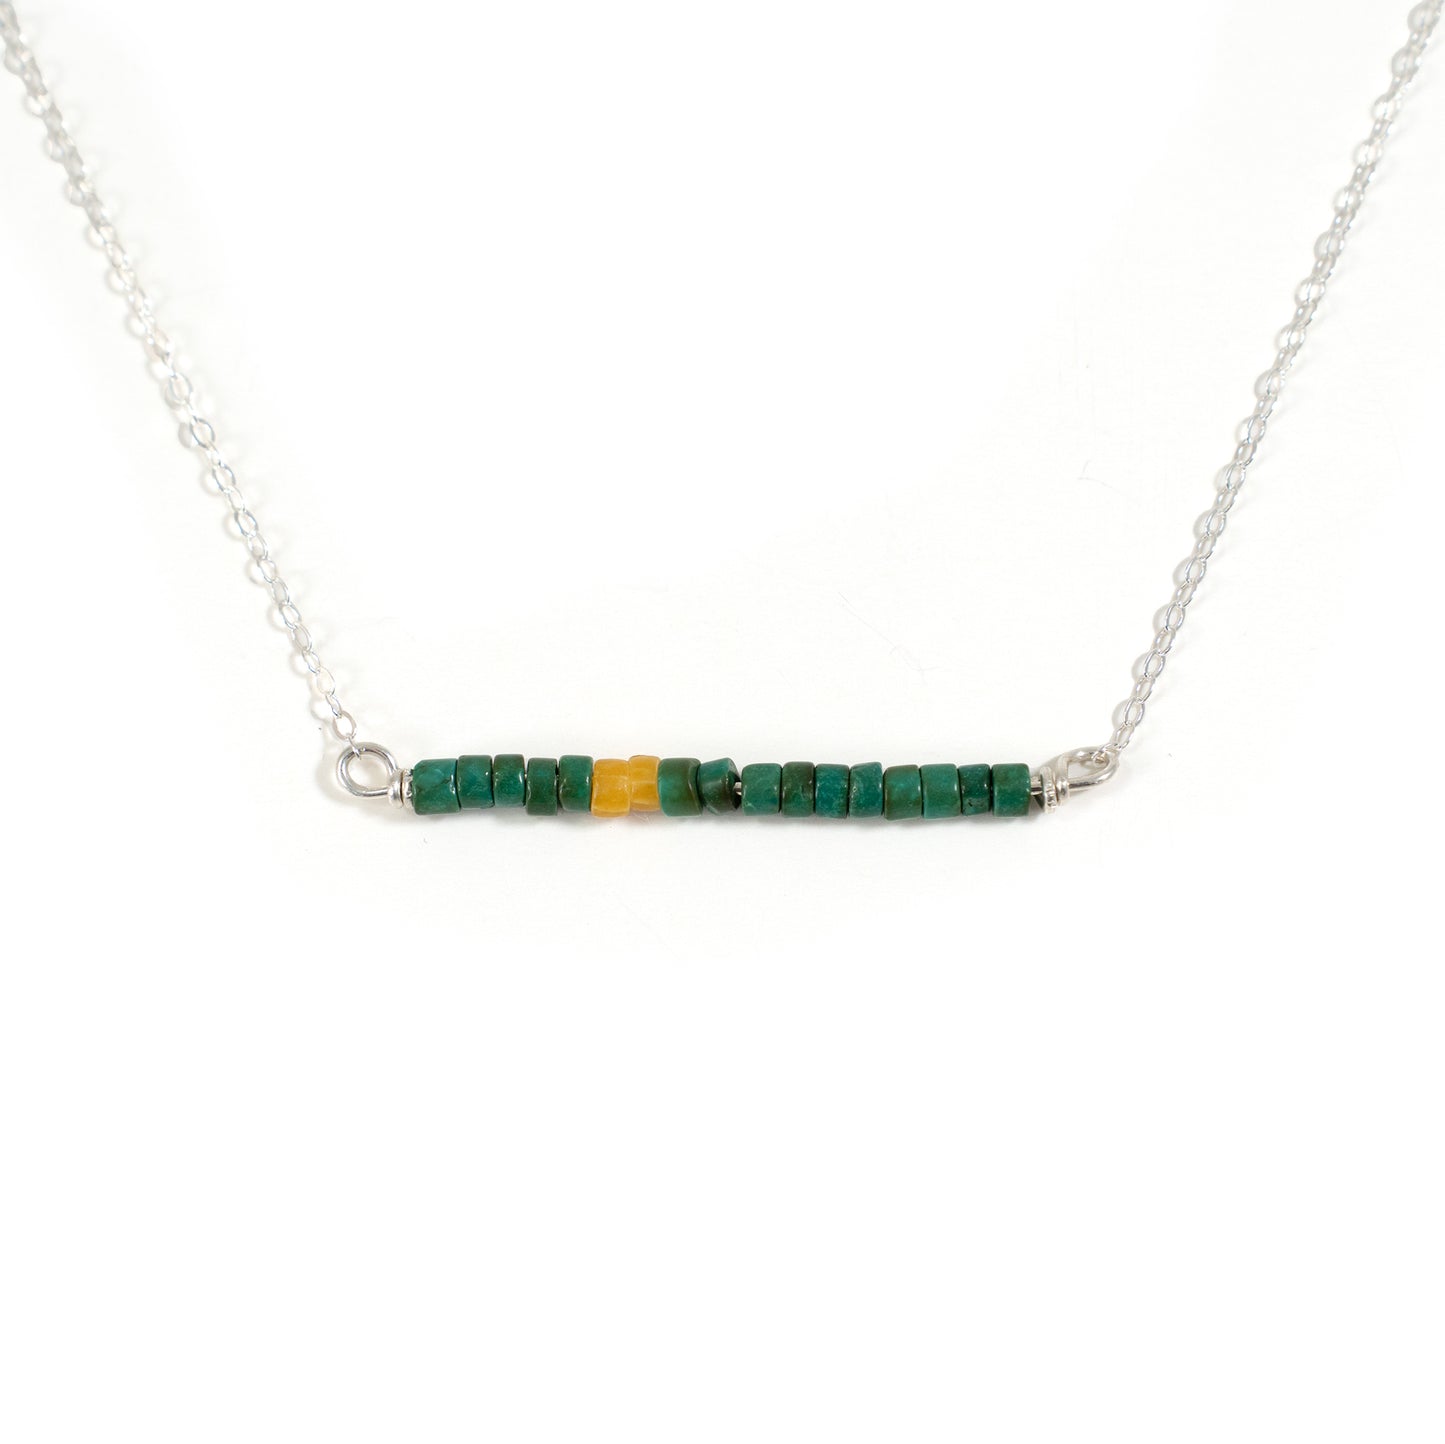 Silver Necklace with Turquoise Bead Bar